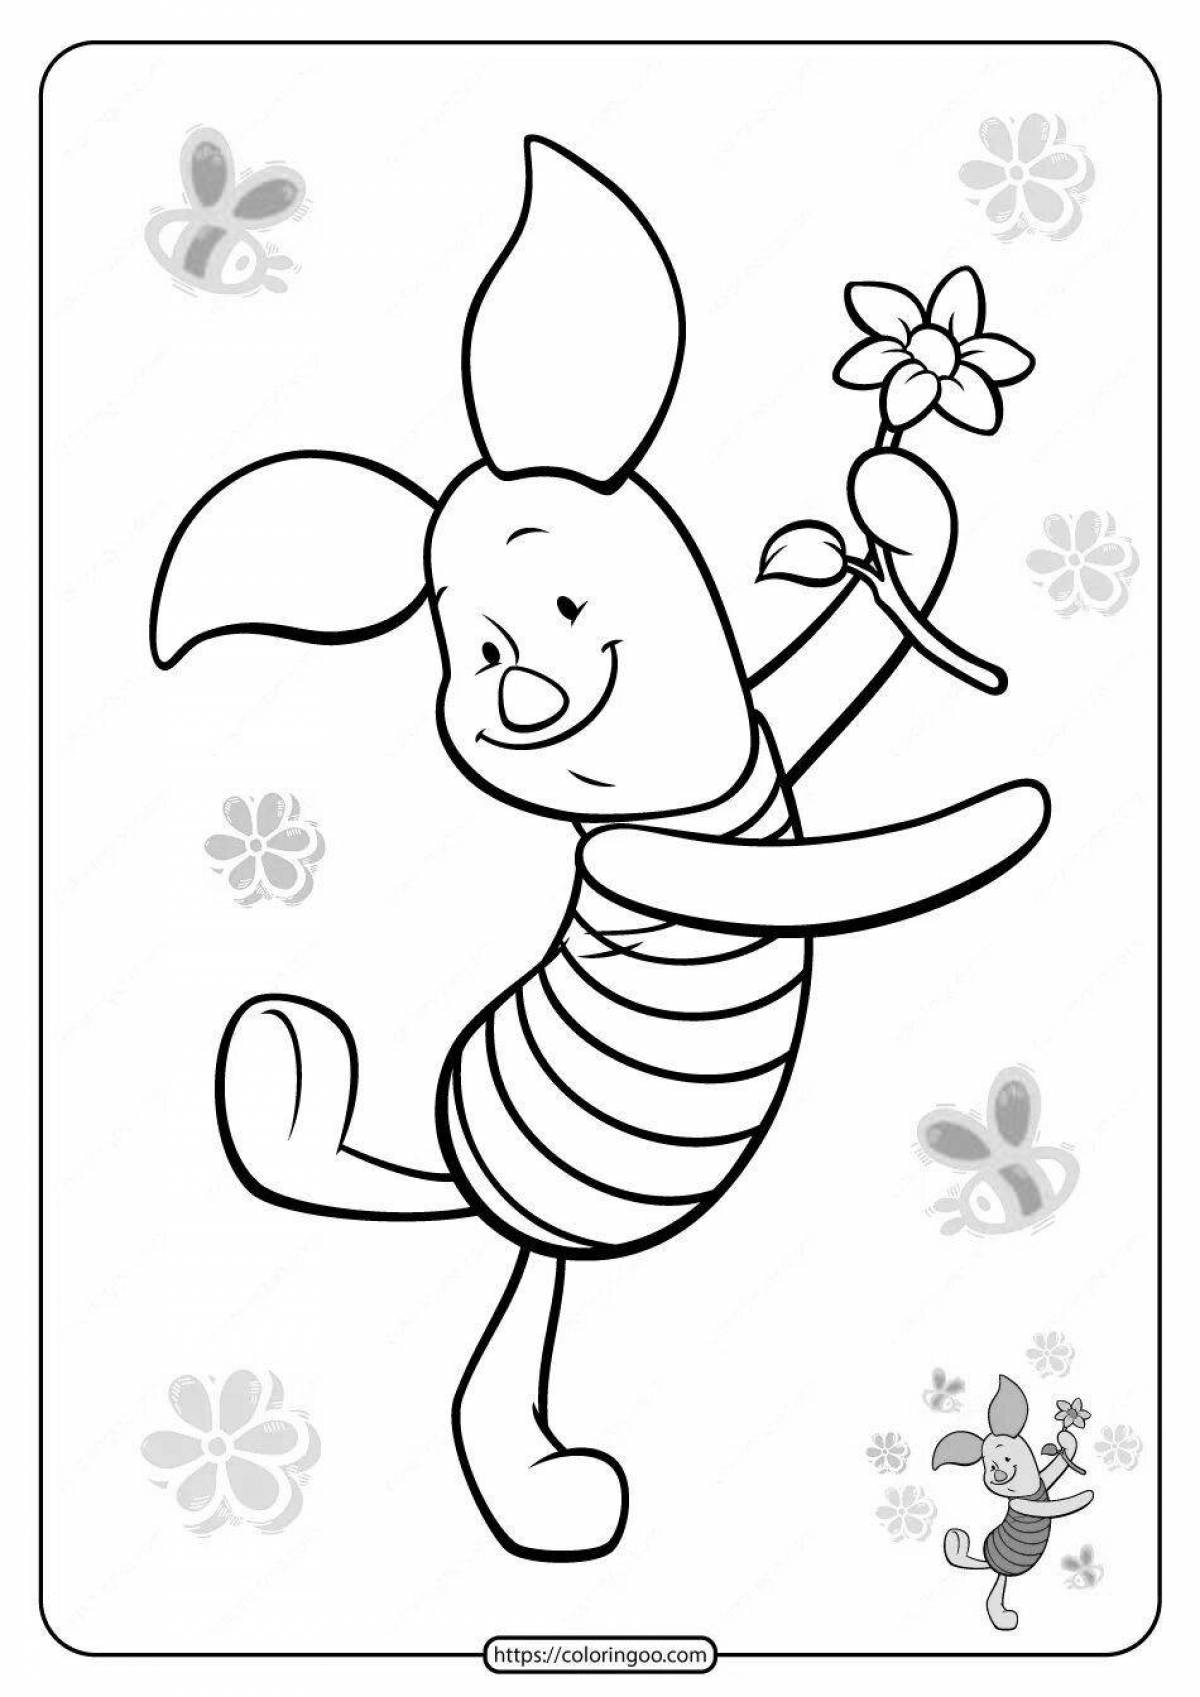 Coloring book with adorable cartoon characters for 4-5 year olds